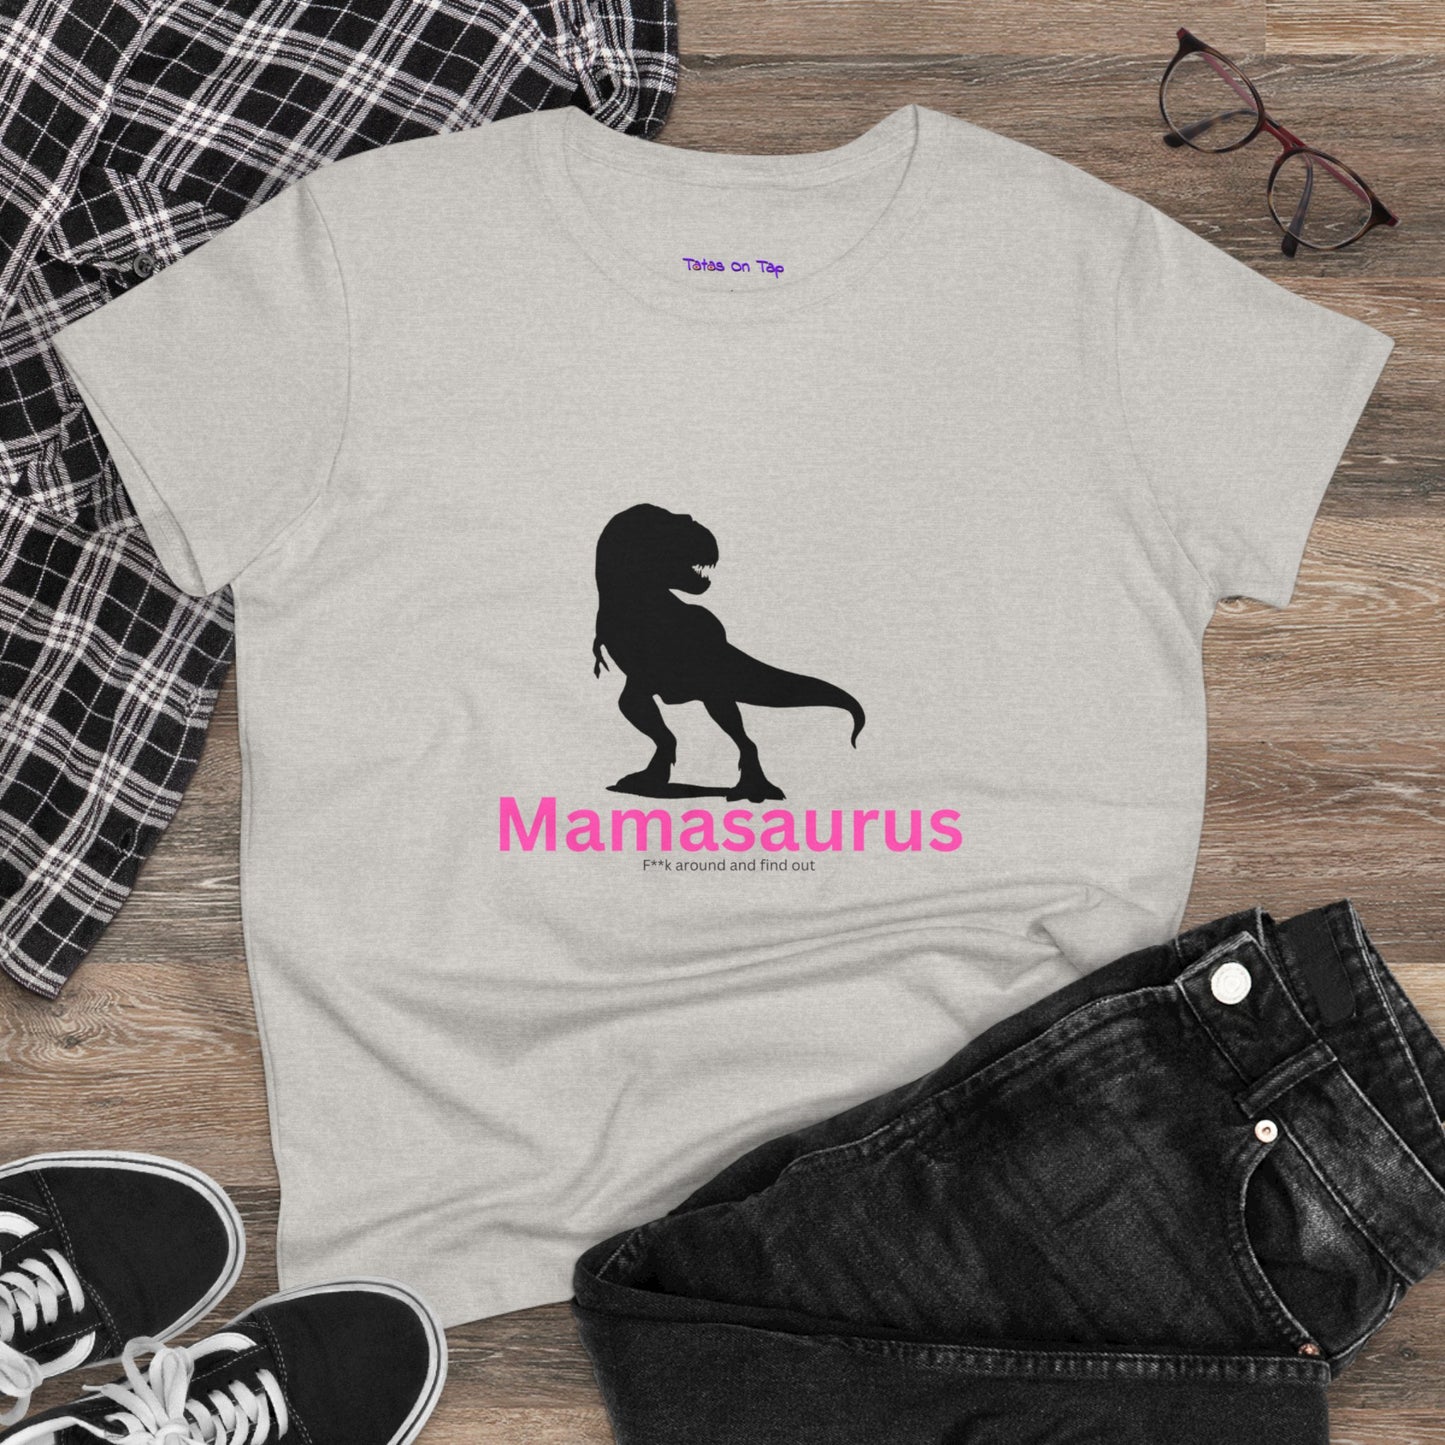 Mamasaurus F**k Around and Find Out